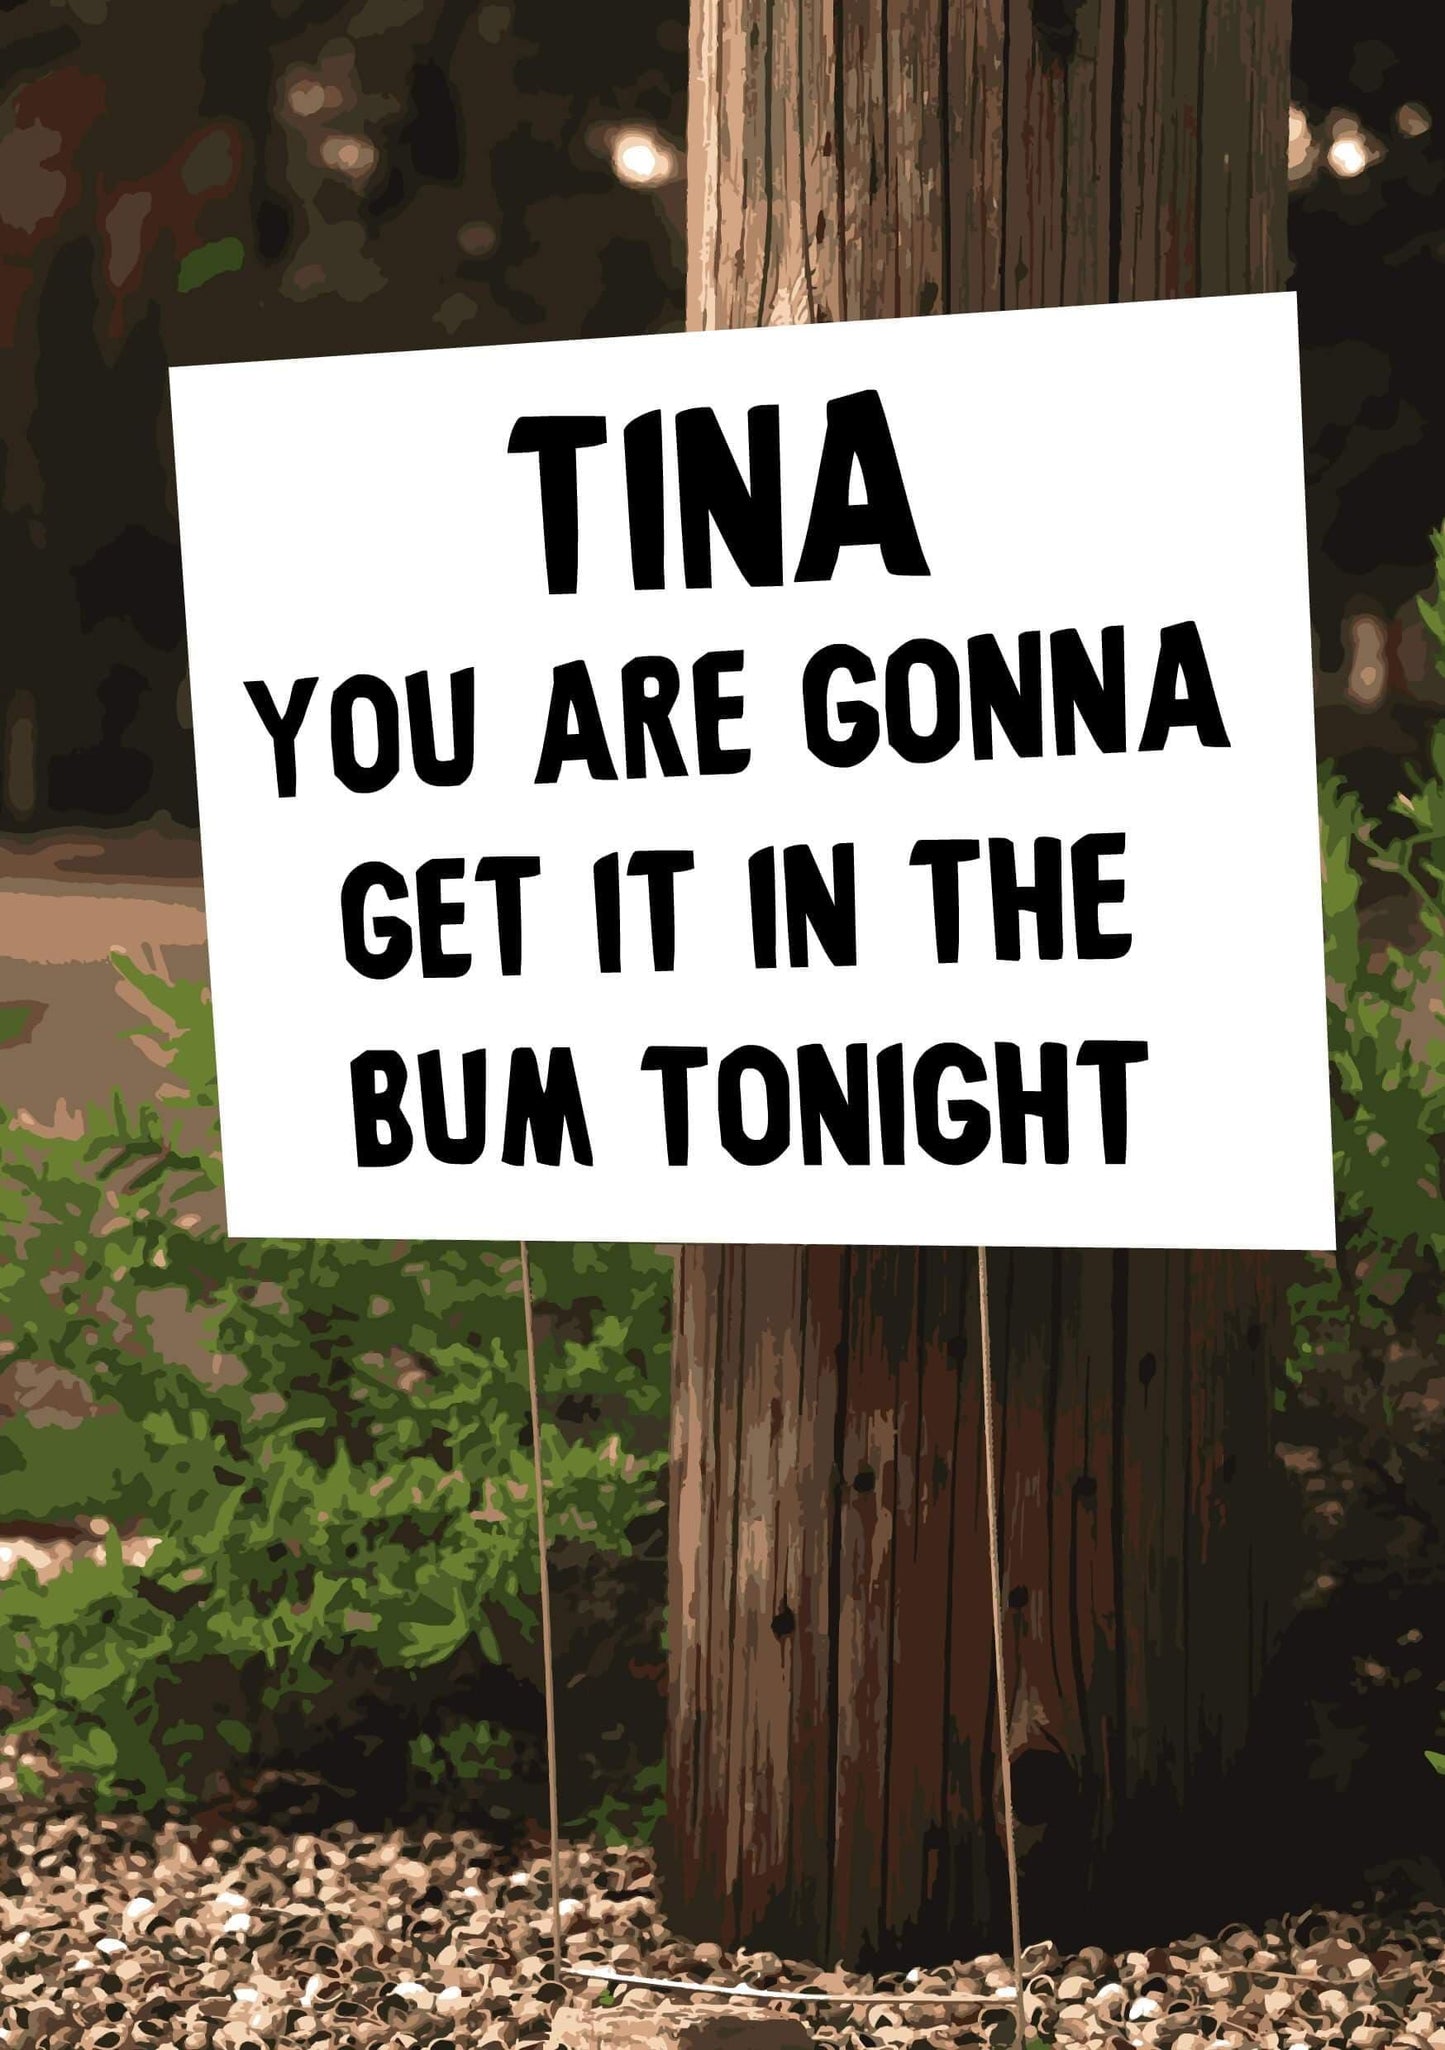 A cheeky greeting card featuring the explicit message "Bum Tonight Tina" from Twisted Gifts.